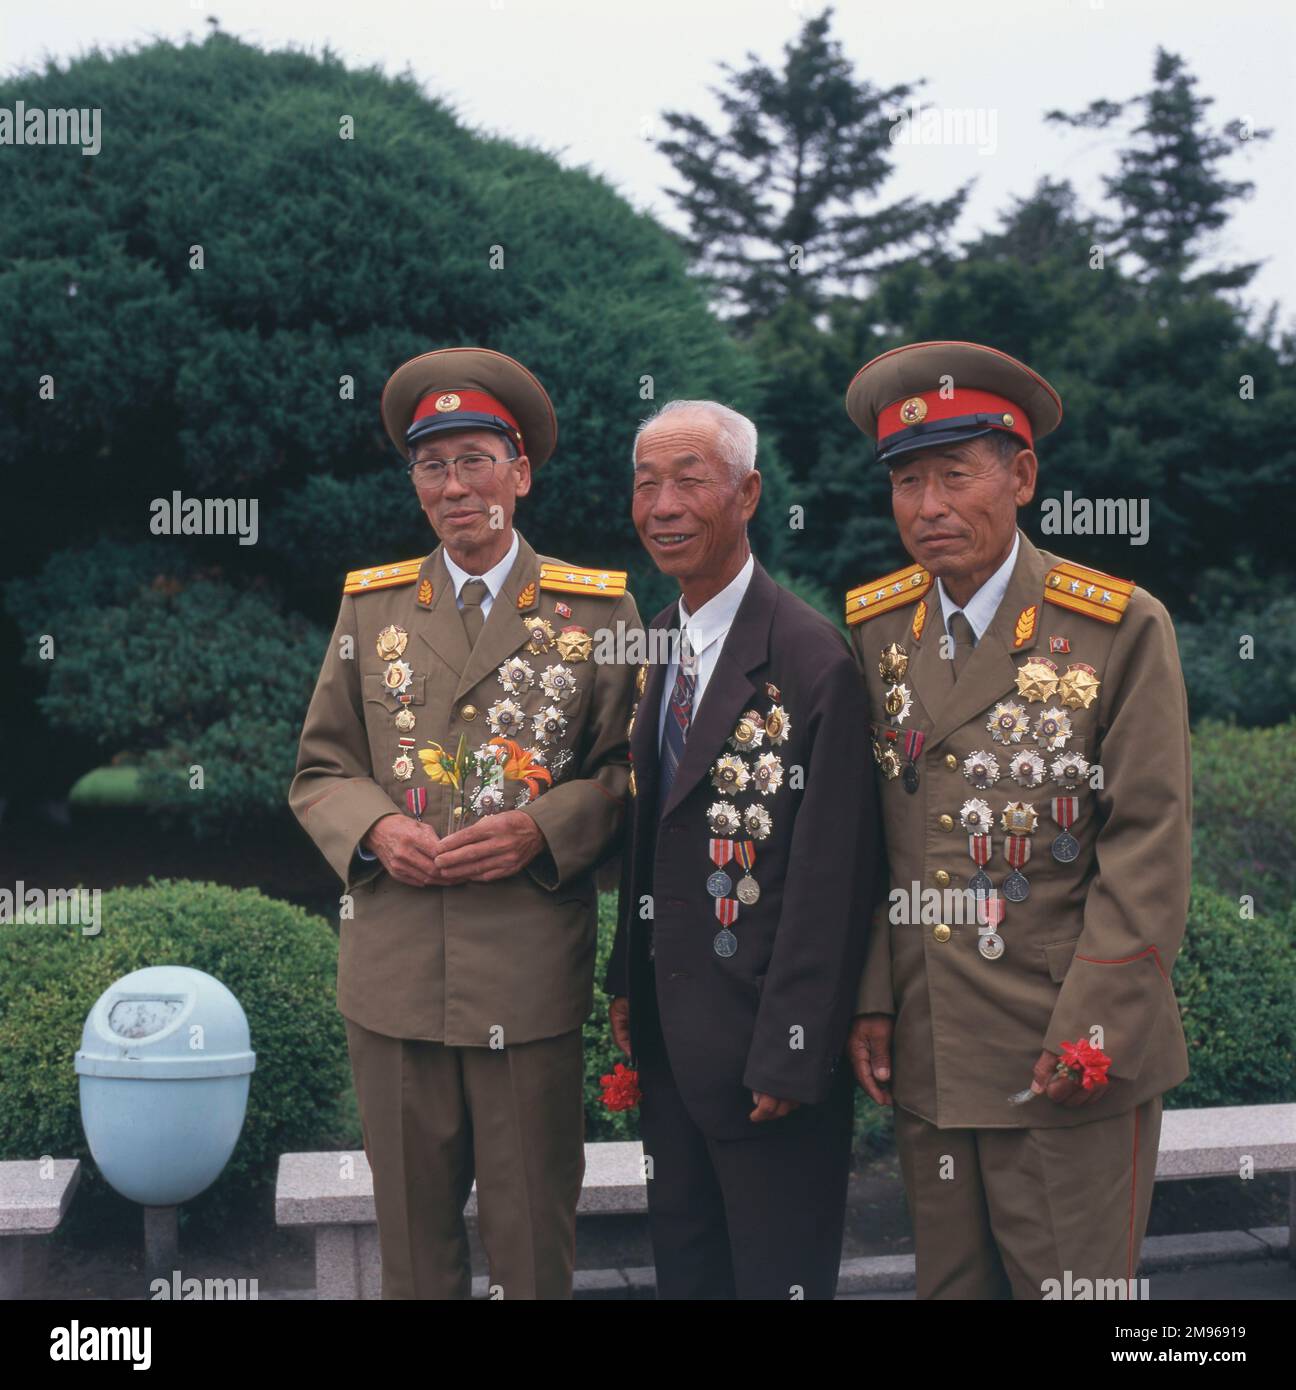 Three veterans of the Korean War (1950-1953) pose for their photo in Pyongyang, capital of North Korea.  Two are in their uniforms, one is in a suit, and all three are wearing many medals and decorations. Stock Photo